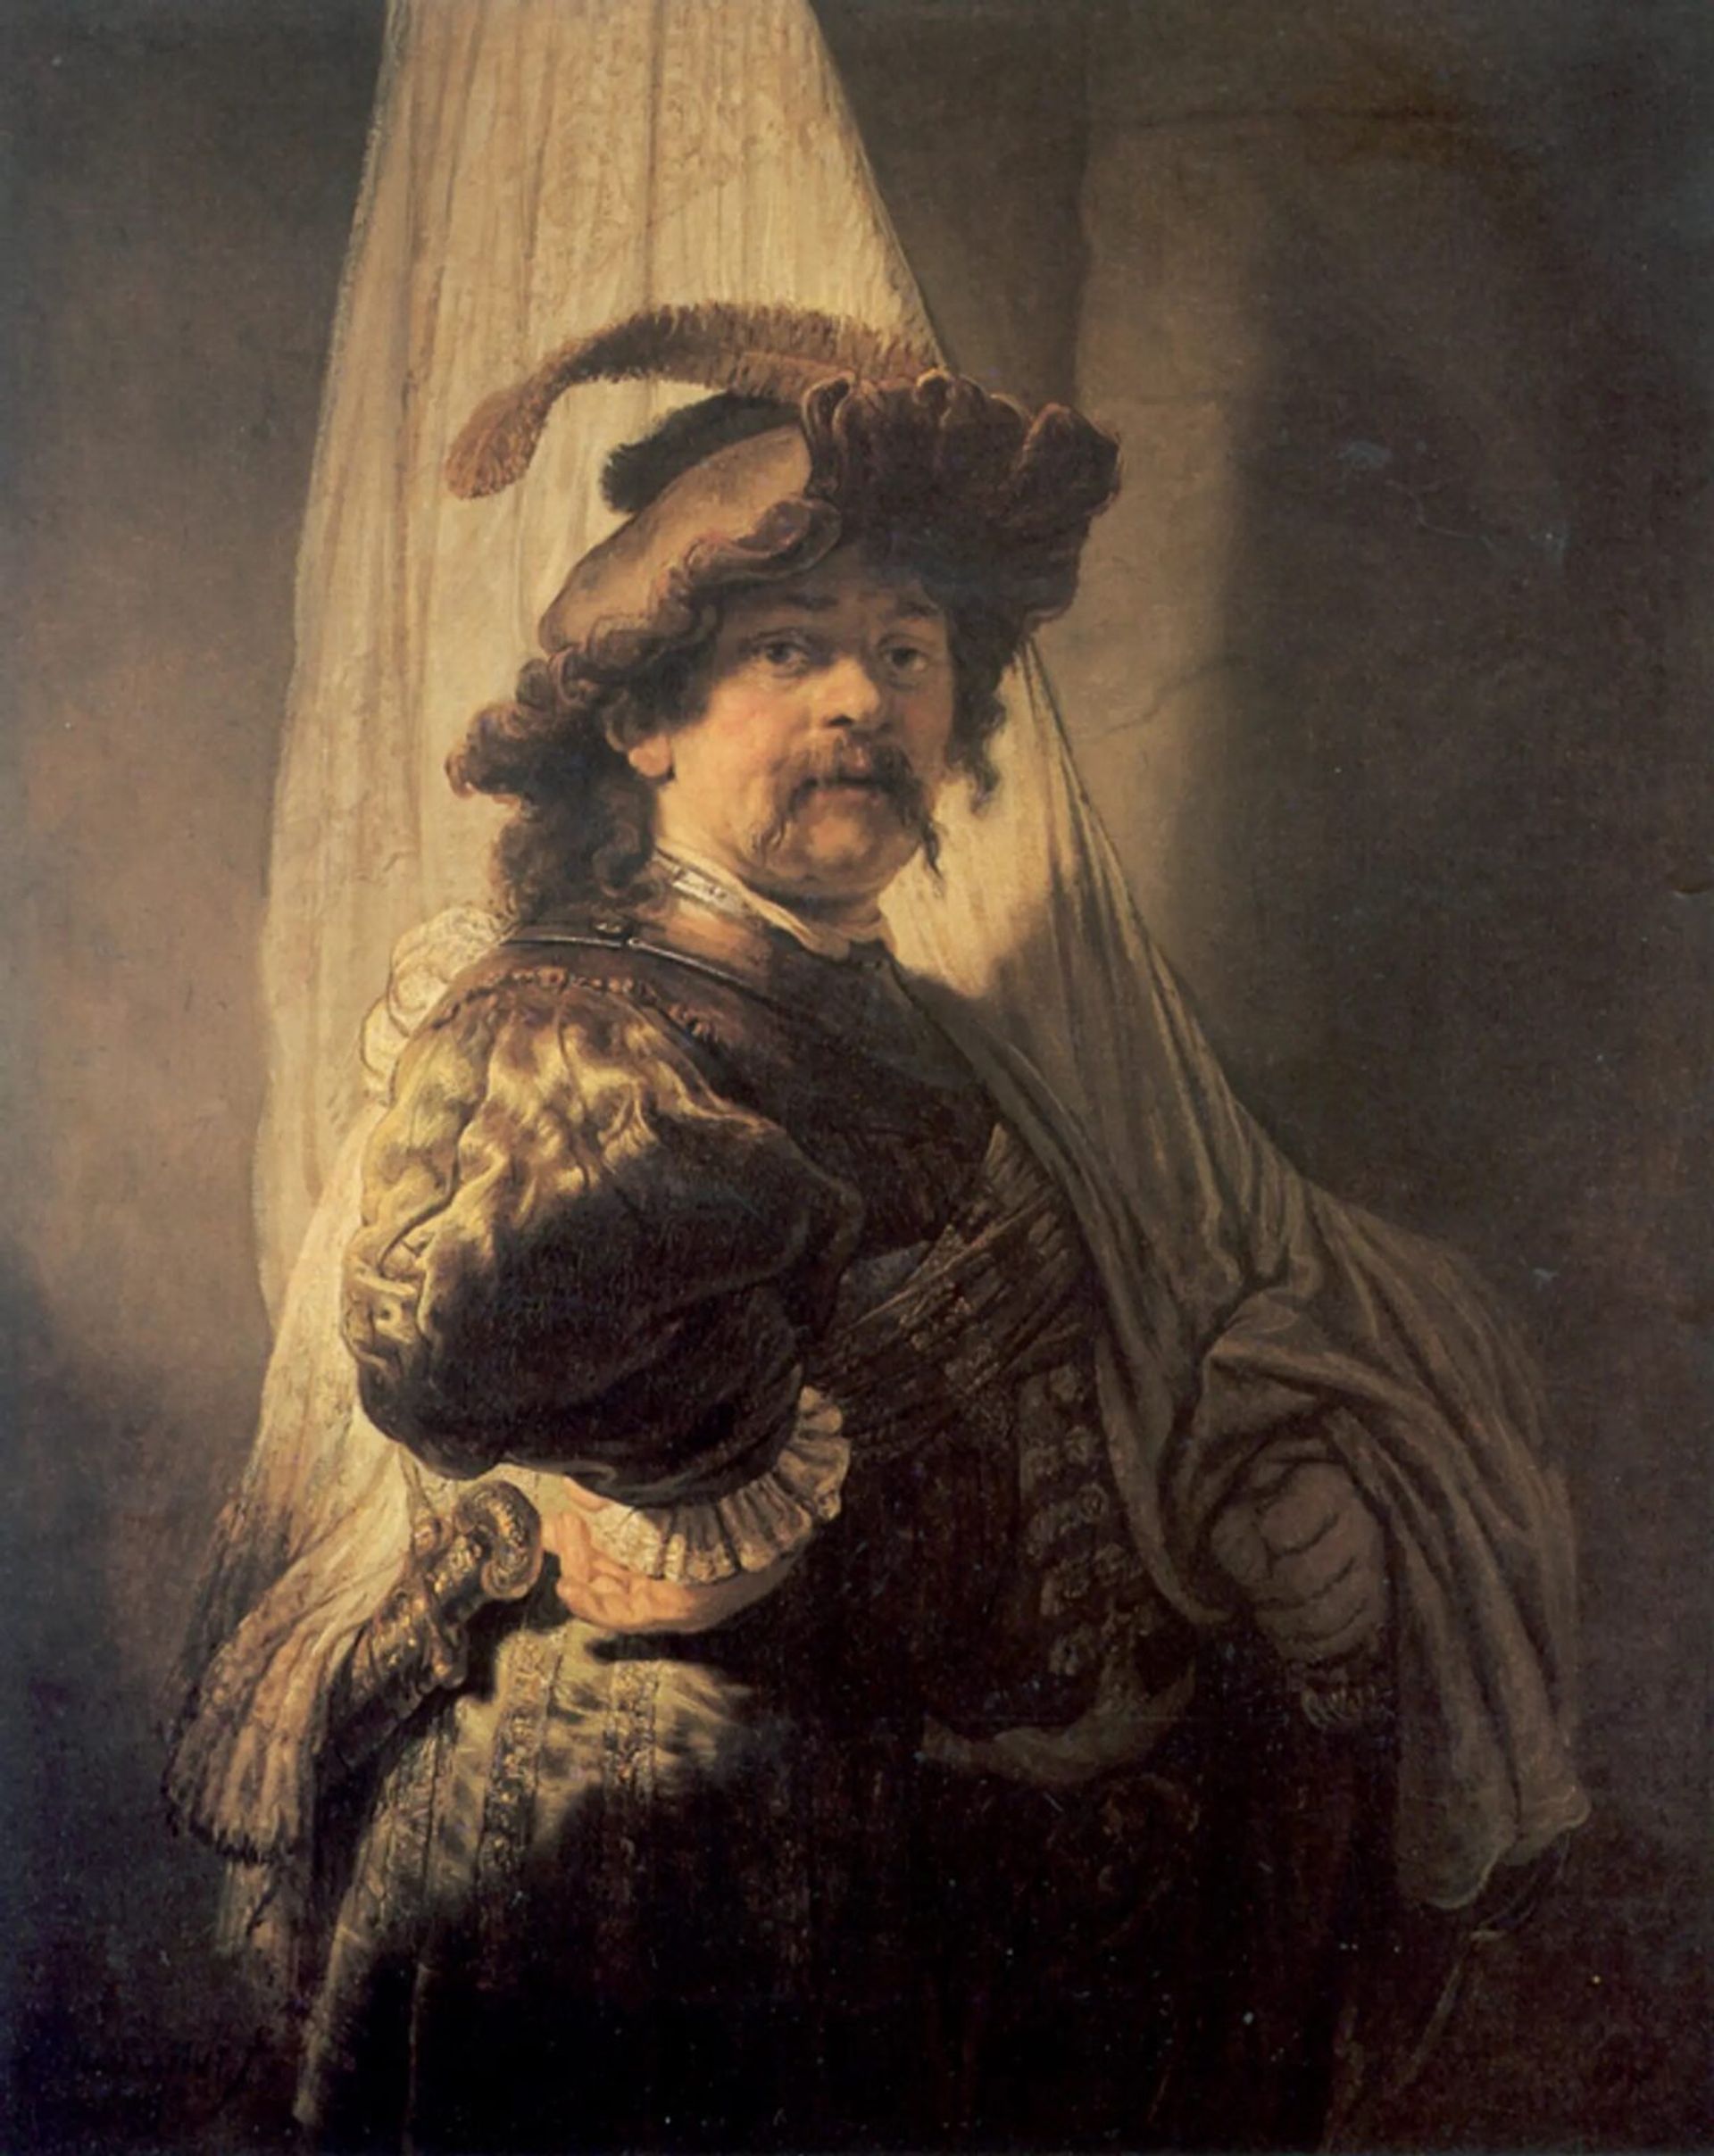 Rembrandt's The Standard Bearer (1636) will go on show in all the provinces of the Netherlands after its purchase by the state